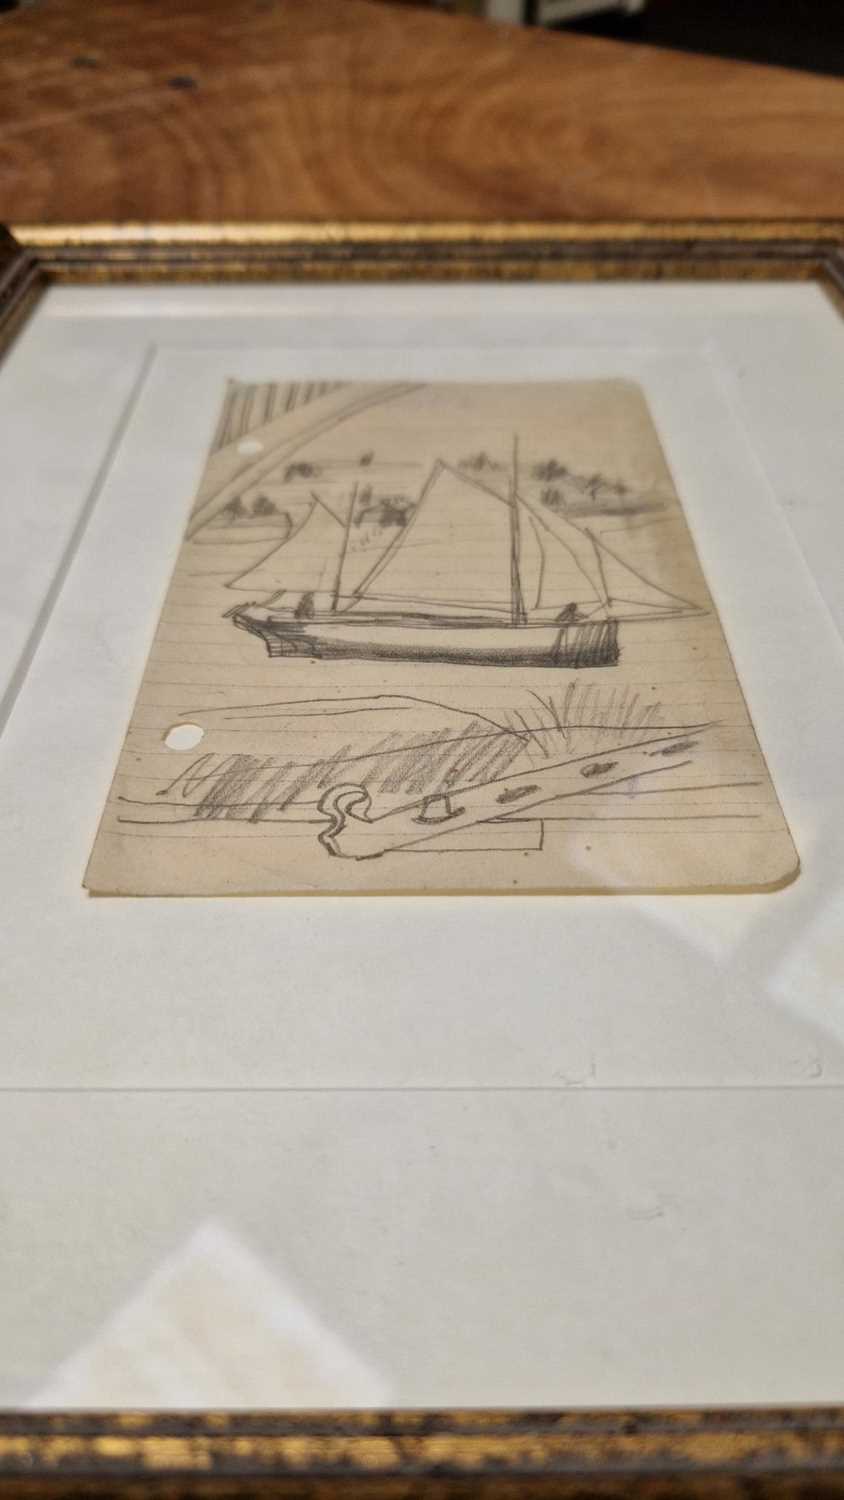 Ben Nicholson (1894-1982), Sailing boat through a window, Isle of Wight, unsigned, pencil on notepap - Image 7 of 7